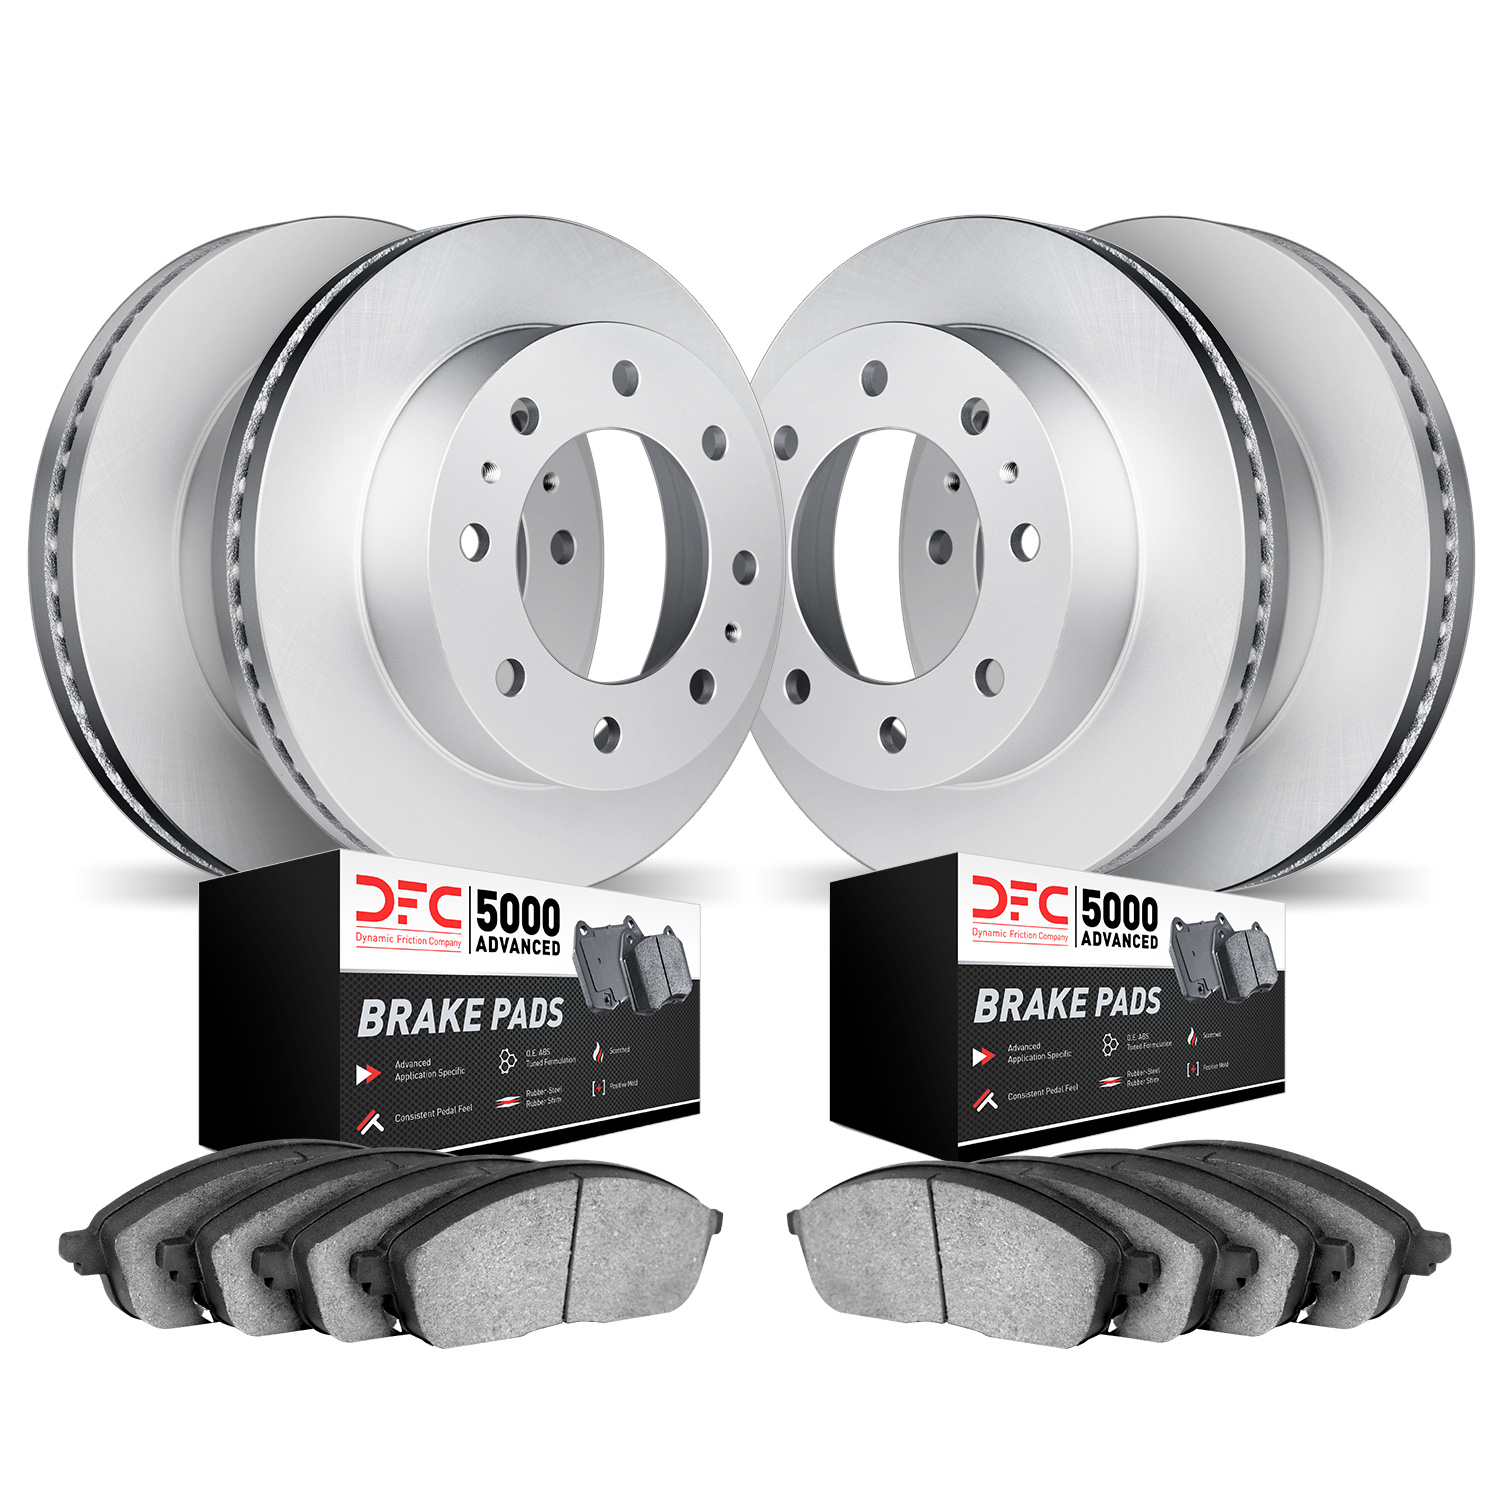 4504-54094 Geospec Brake Rotors w/5000 Advanced Brake Pads Kit, Fits Select Ford/Lincoln/Mercury/Mazda, Position: Front and Rear